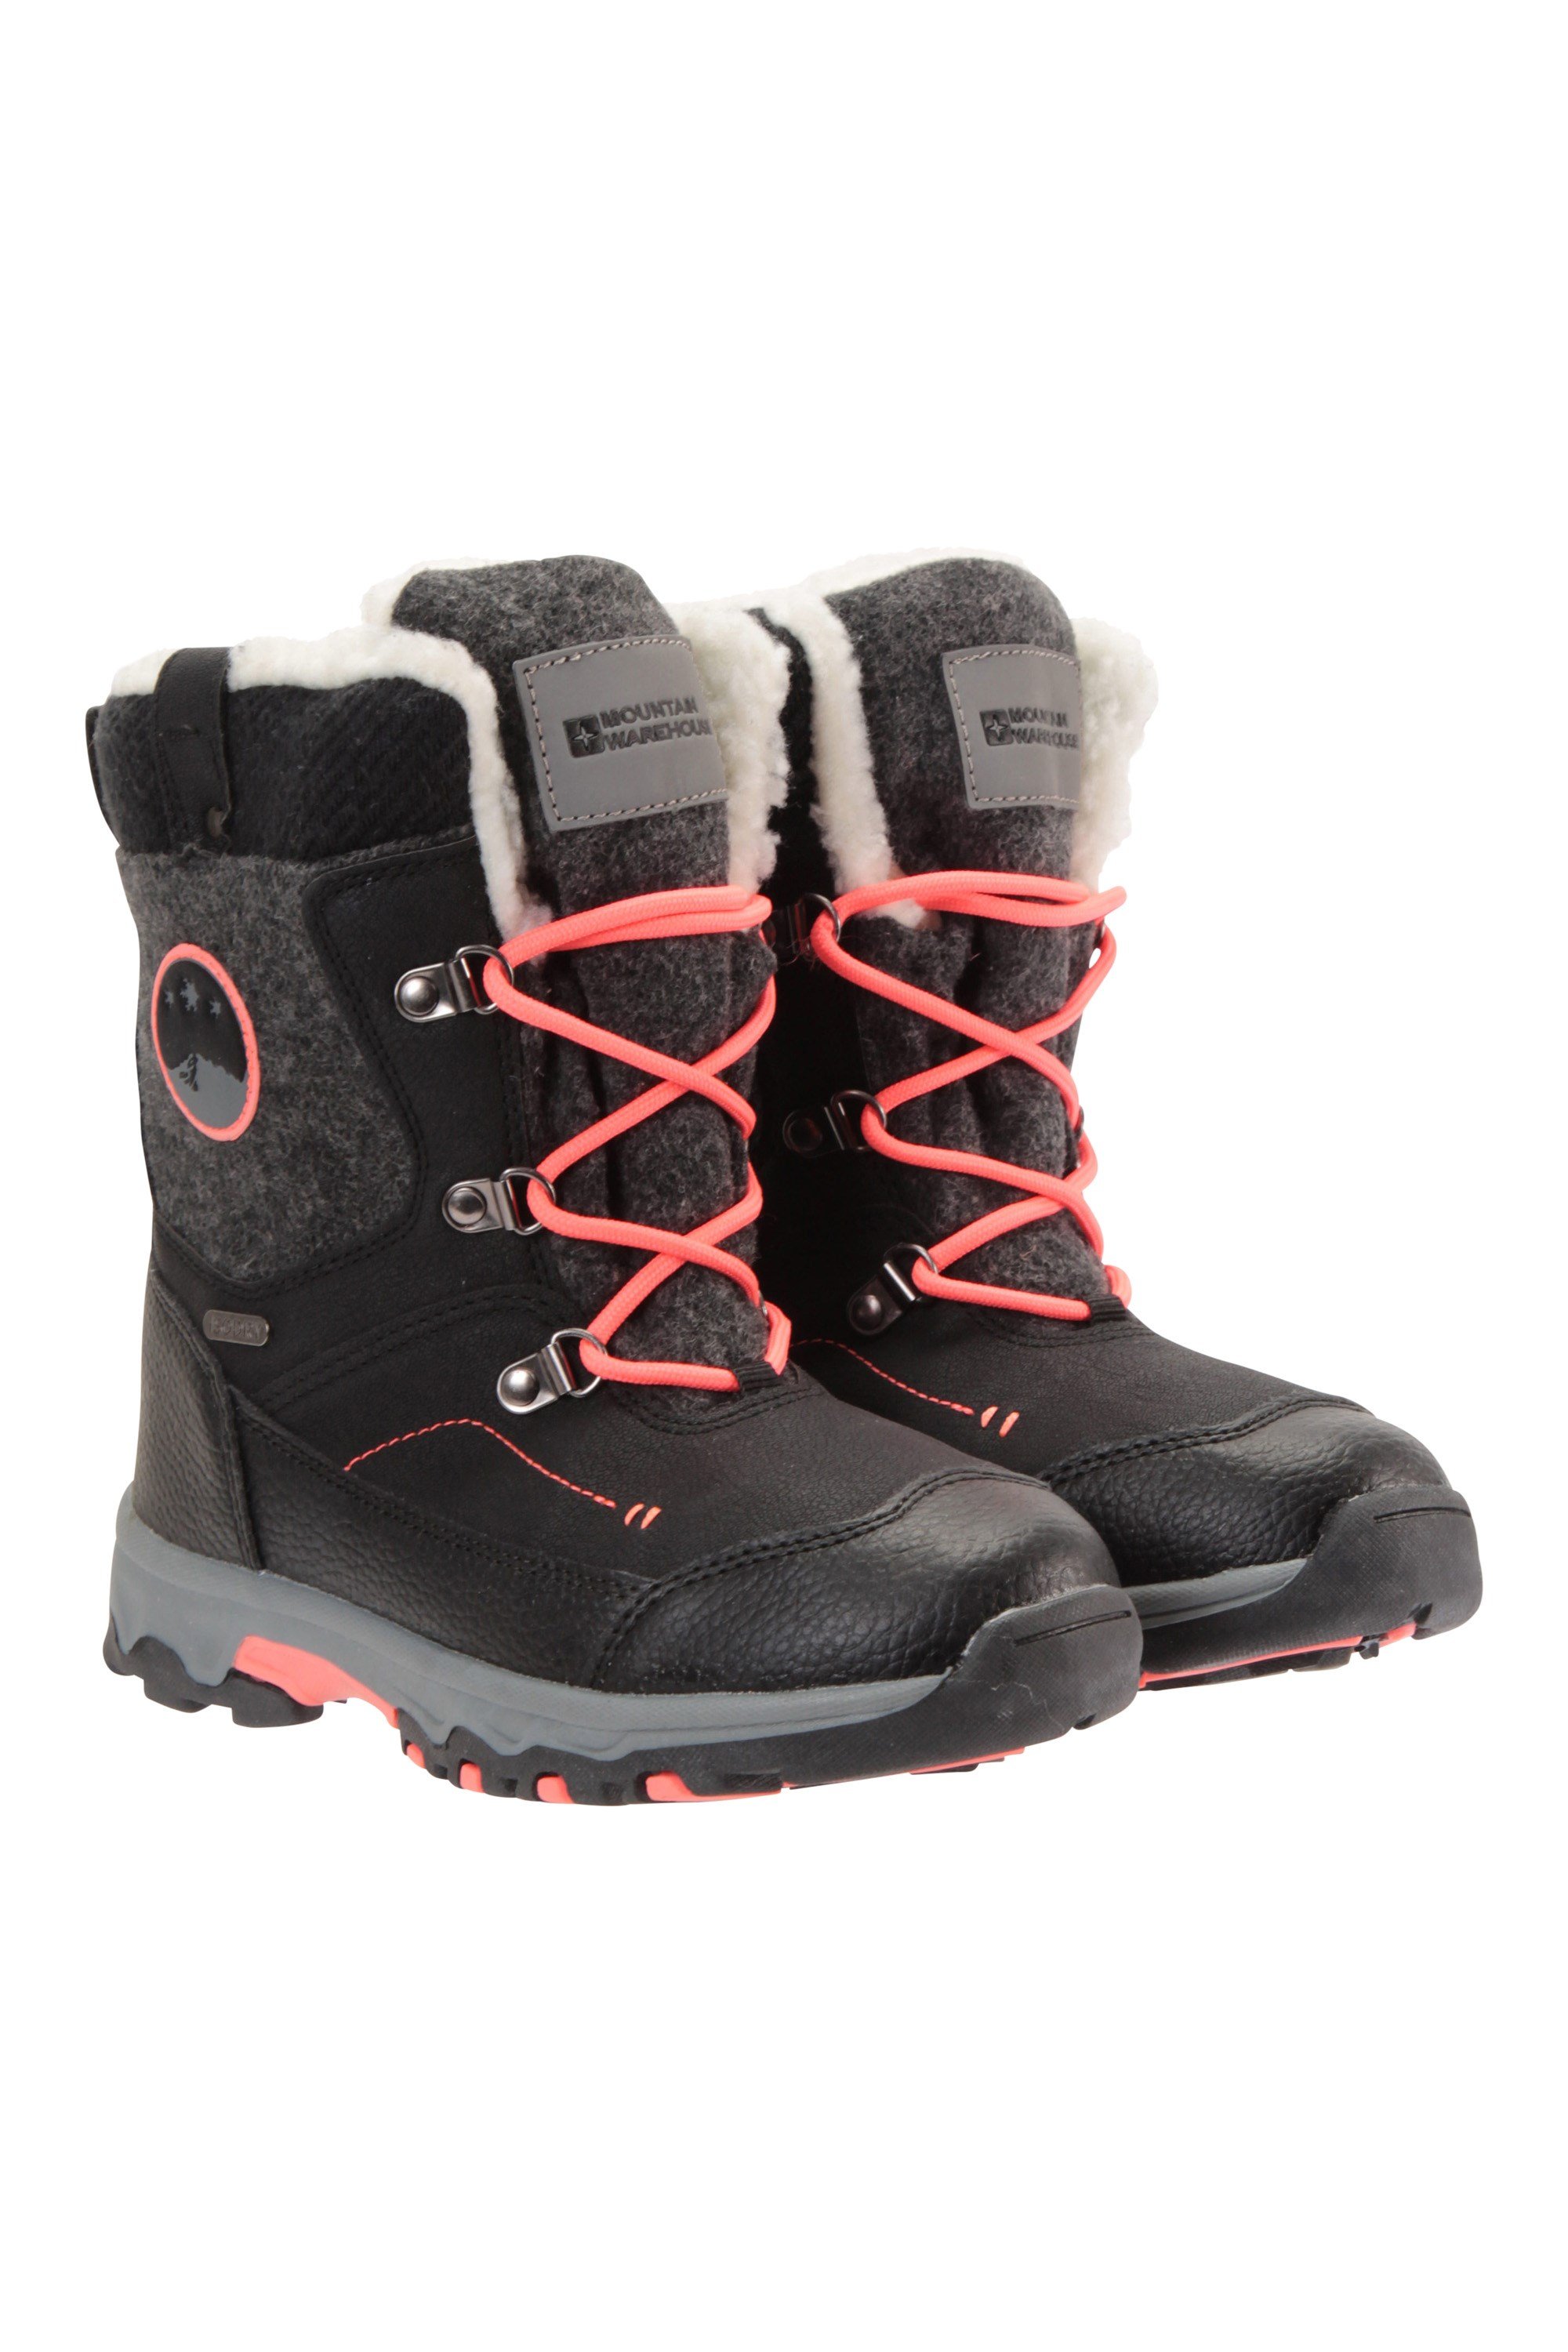 Heavenly Kids Snow Boots | Mountain 